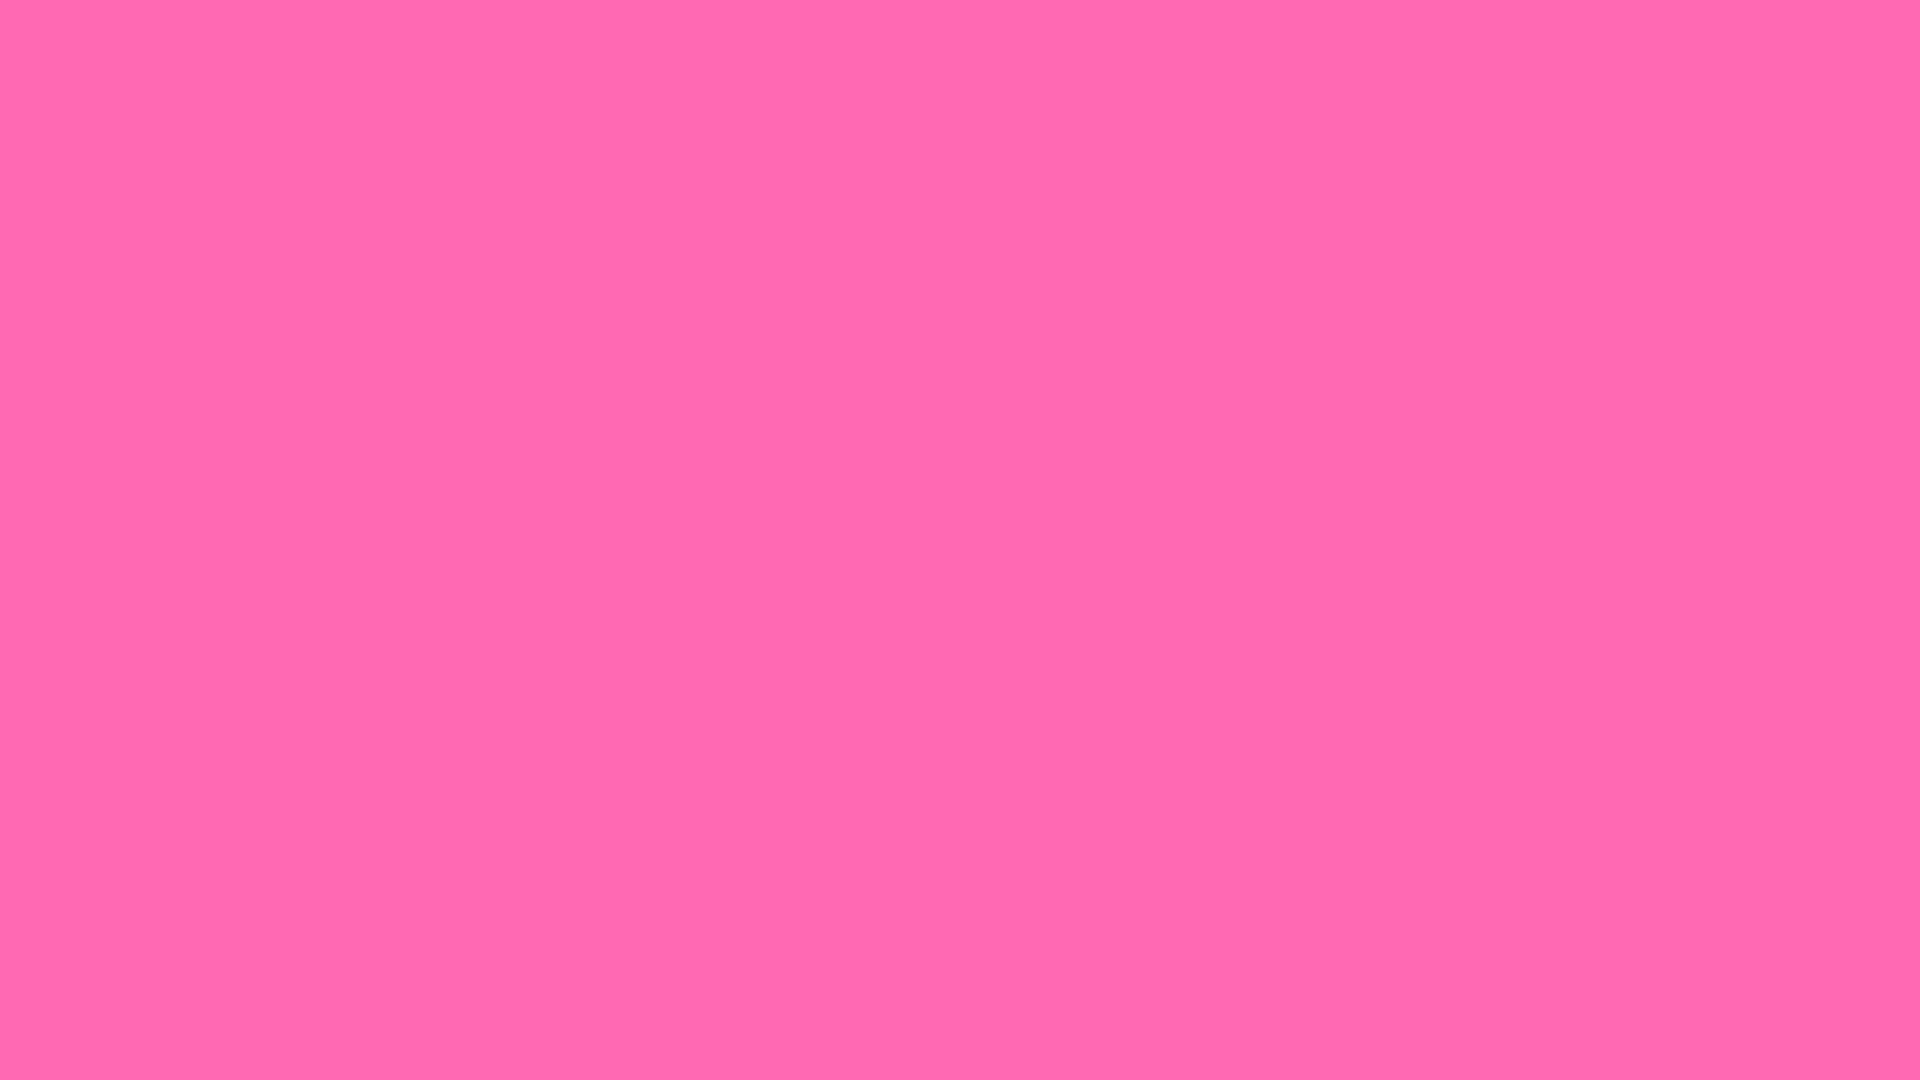 Solid Hot Pink Background Image Pictures Becuo